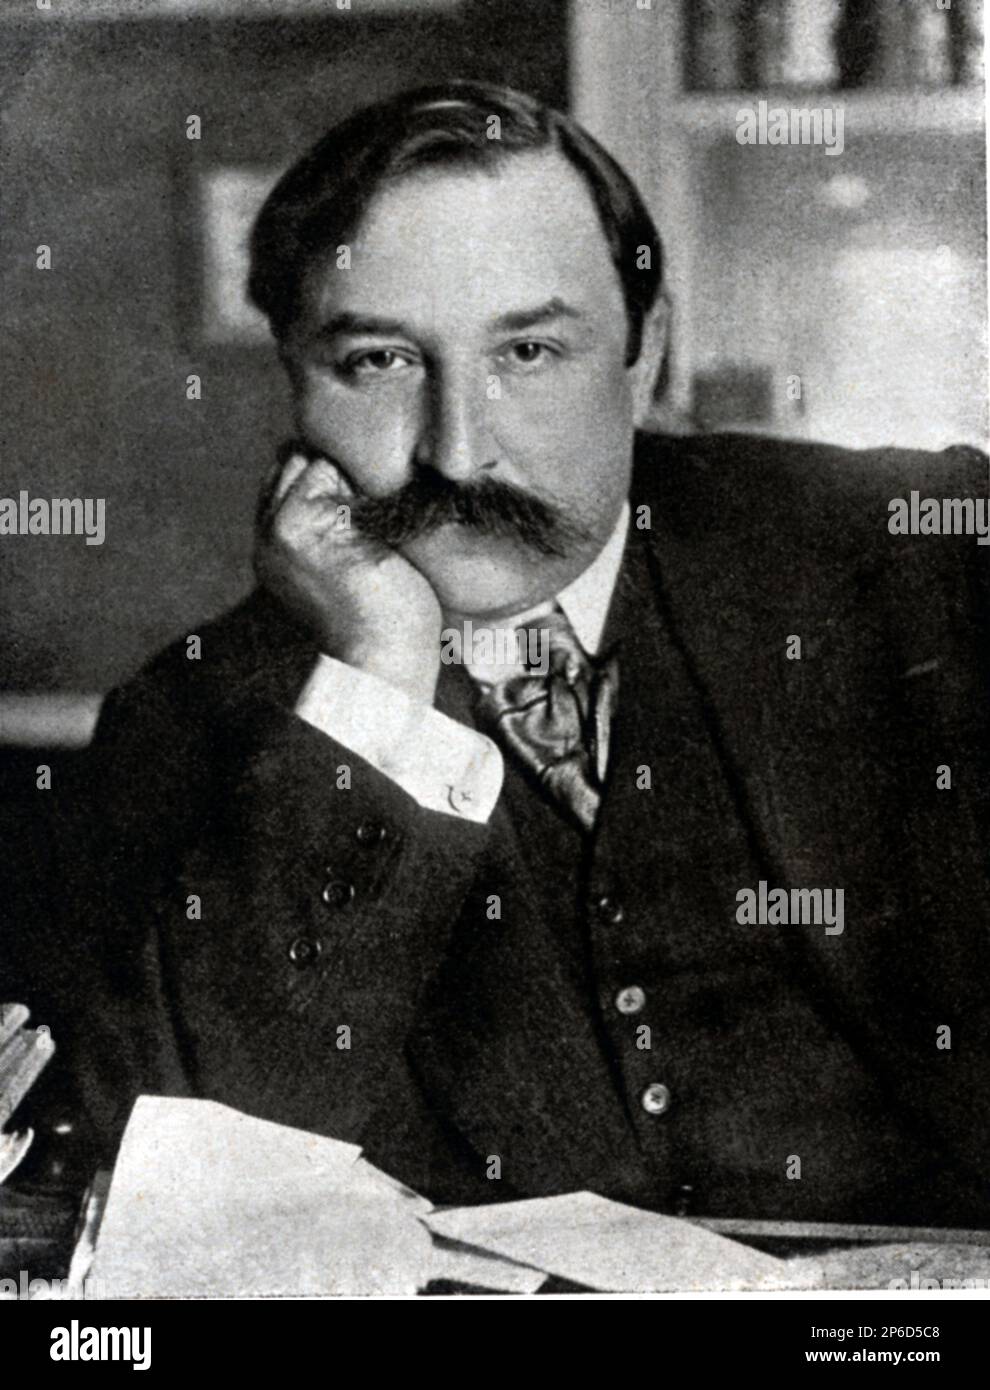 The french play writer  and dramatist G. A. ( Gaston Armand ) DE CAILLAVET ( 1869 - 1915 ) of Comedie-Française . Son of Albert Arman de Caillavet and Leontine Lippmann , the muse of Anatole France . Married in 1893 with Jeanne Pouquet . Her daugther Suzanne De Caillavet  marry the  writer  André Maurois . From 1901 to 1915 DE CAILLAVET wrote in collaboration with Robert de Flers numerous Operettes and comedies de boulevard : Les travaux d'Hercule ( Le pillole d' Ercole ) , 1901 , was the most celebrated. - LETTERATO - SCRITTORE - LETTERATURA - Literature -   drammaturgo - TEATRO - THEATRE - c Stock Photo